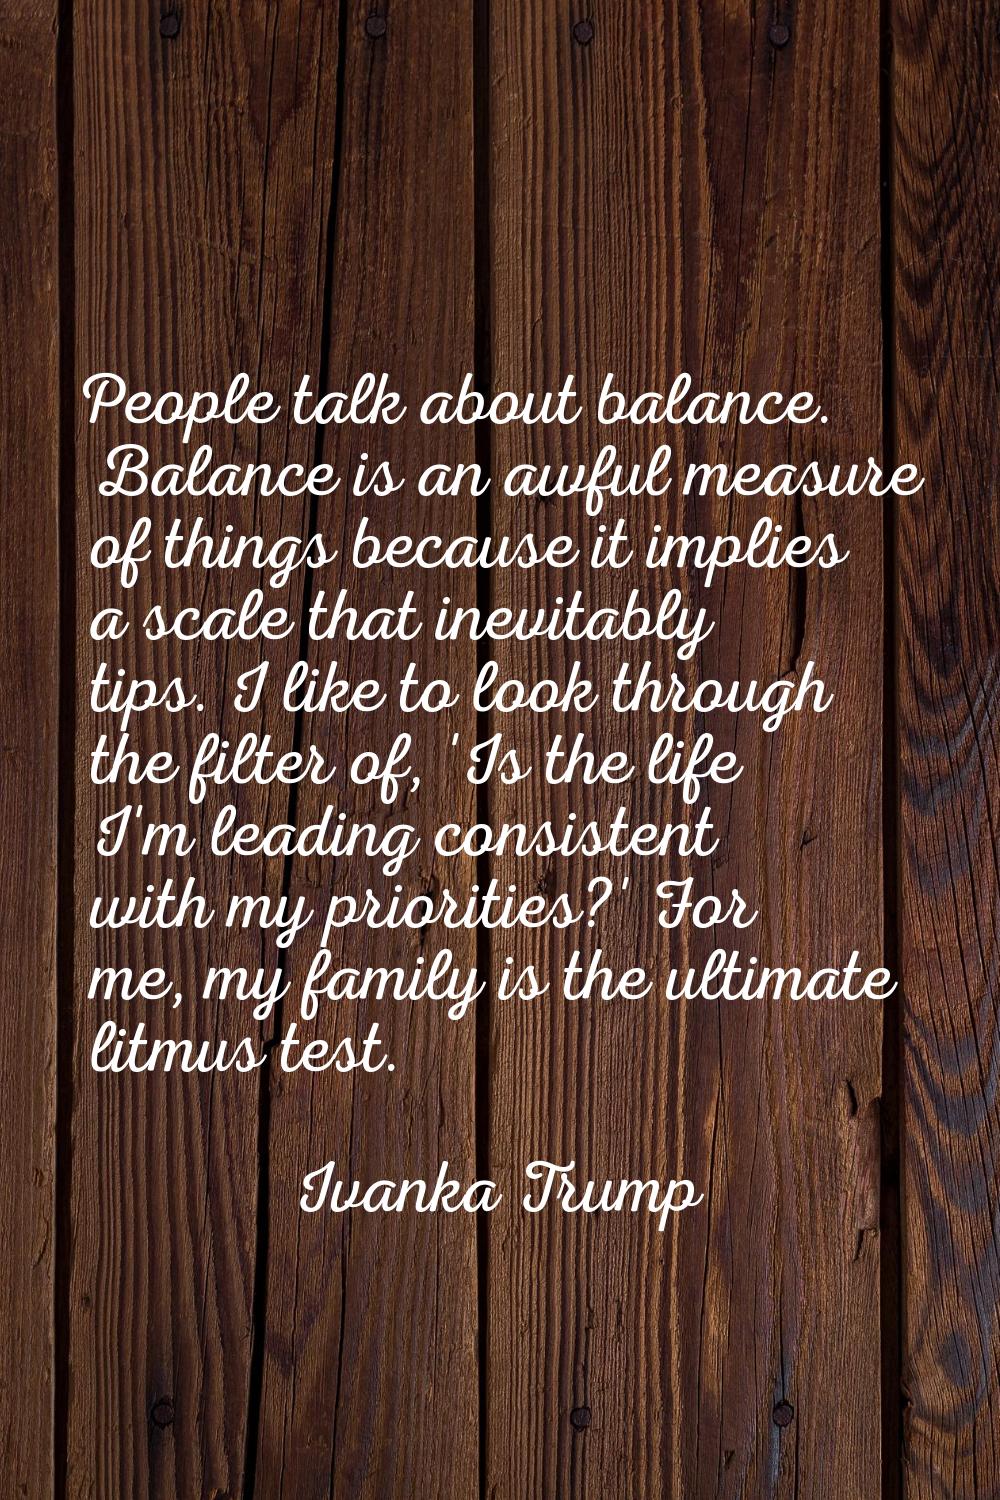 People talk about balance. Balance is an awful measure of things because it implies a scale that in